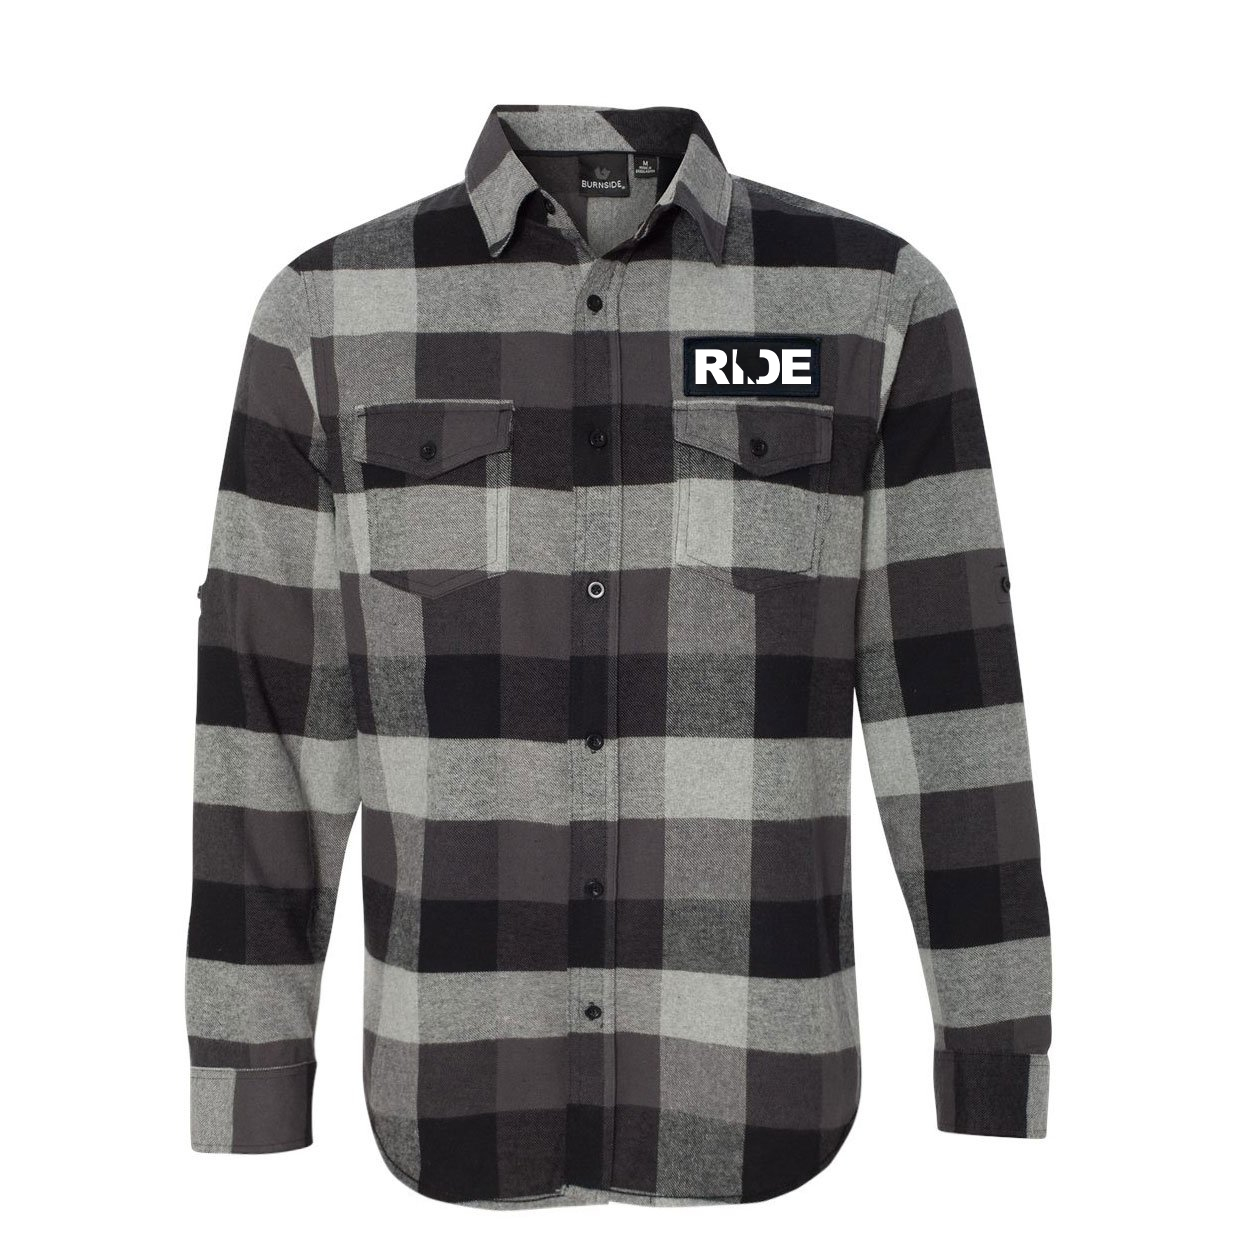 Ride Nevada Classic Unisex Long Sleeve Woven Patch Flannel Shirt Black/Gray (White Logo)